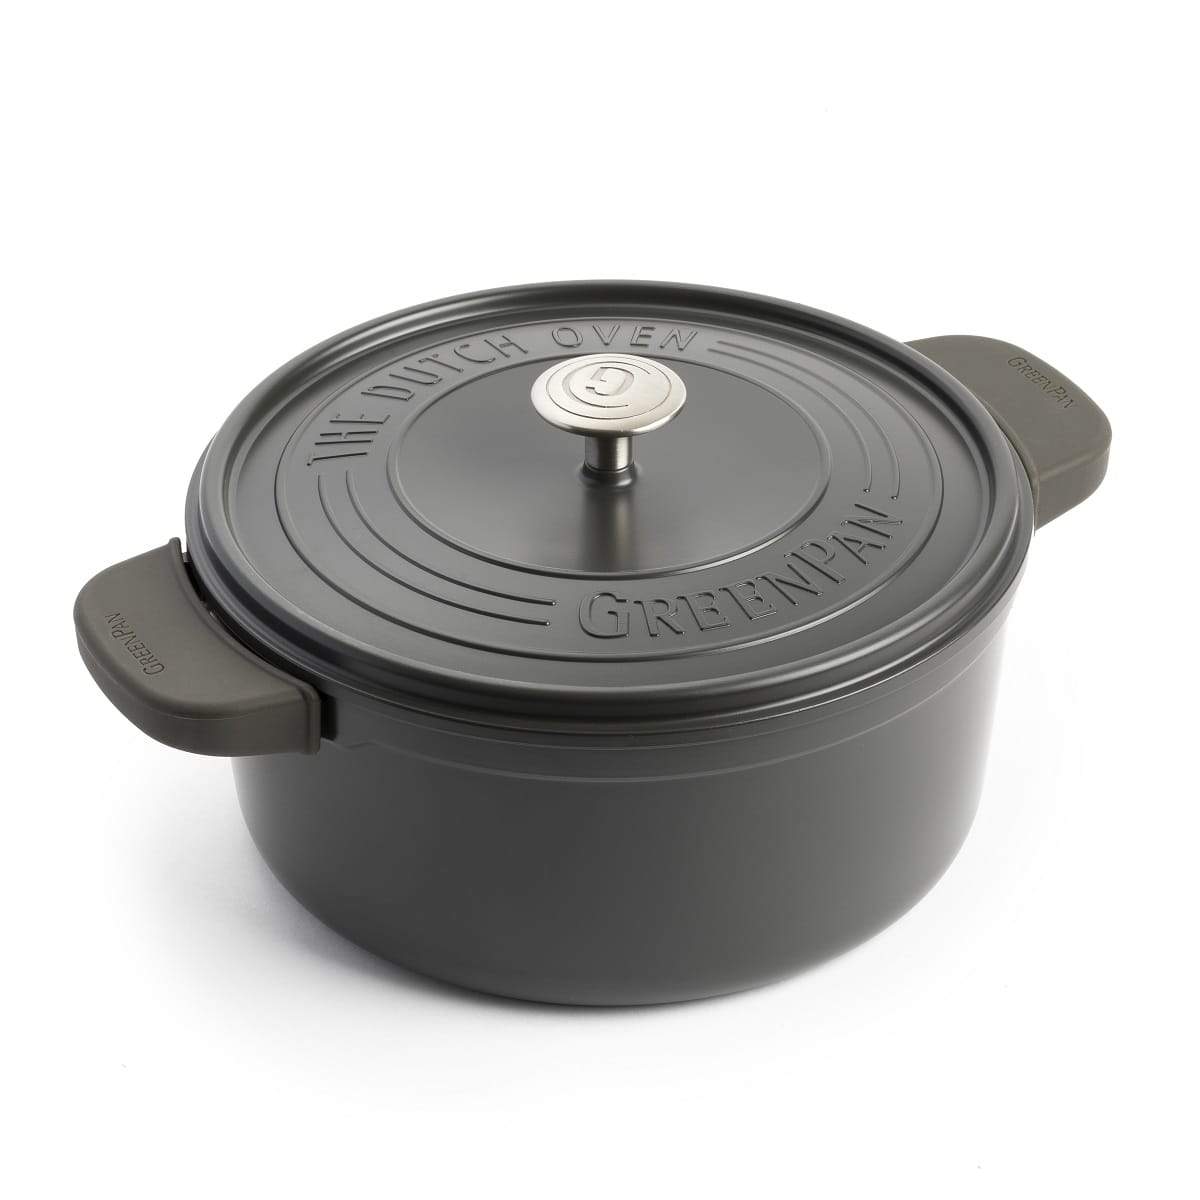 CC002298-001 - Featherweights Casserole with Lid, Browny Black - 22cm - Product Image 4